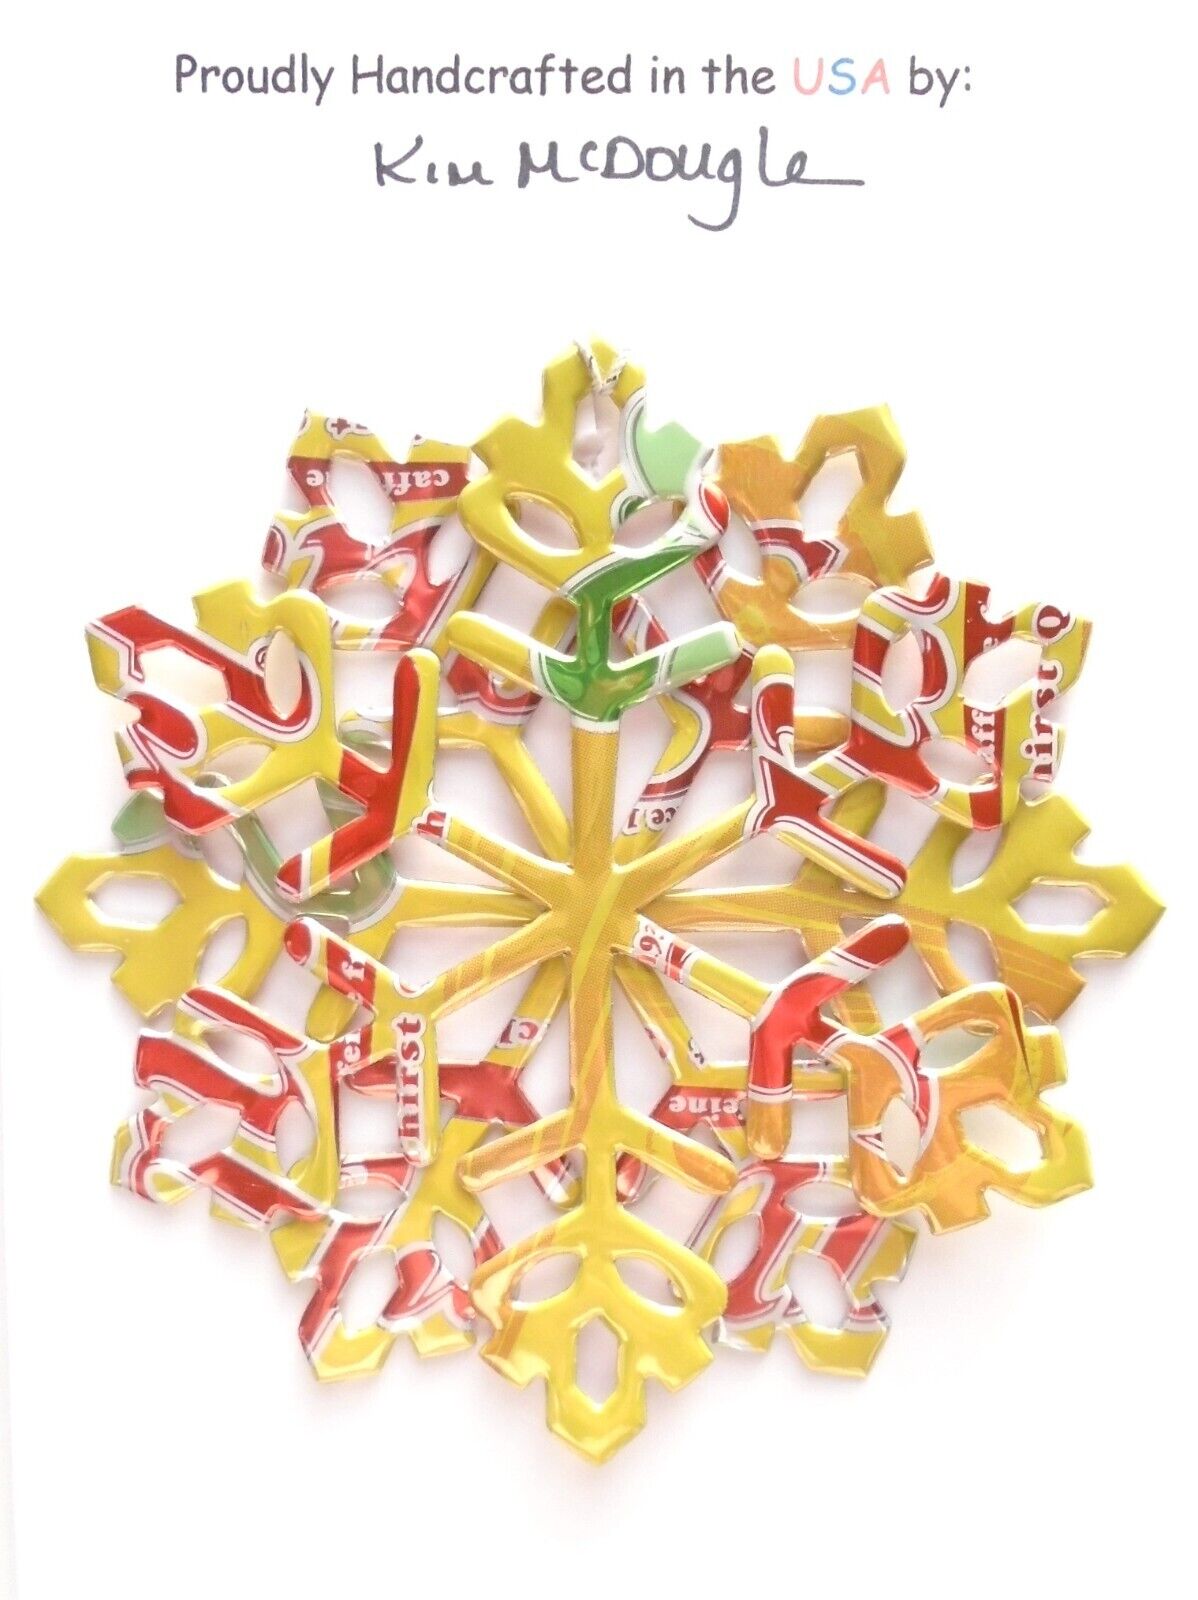 Snowflake Christmas Ornament Handmade With Recycled Aluminum Cans You Choose